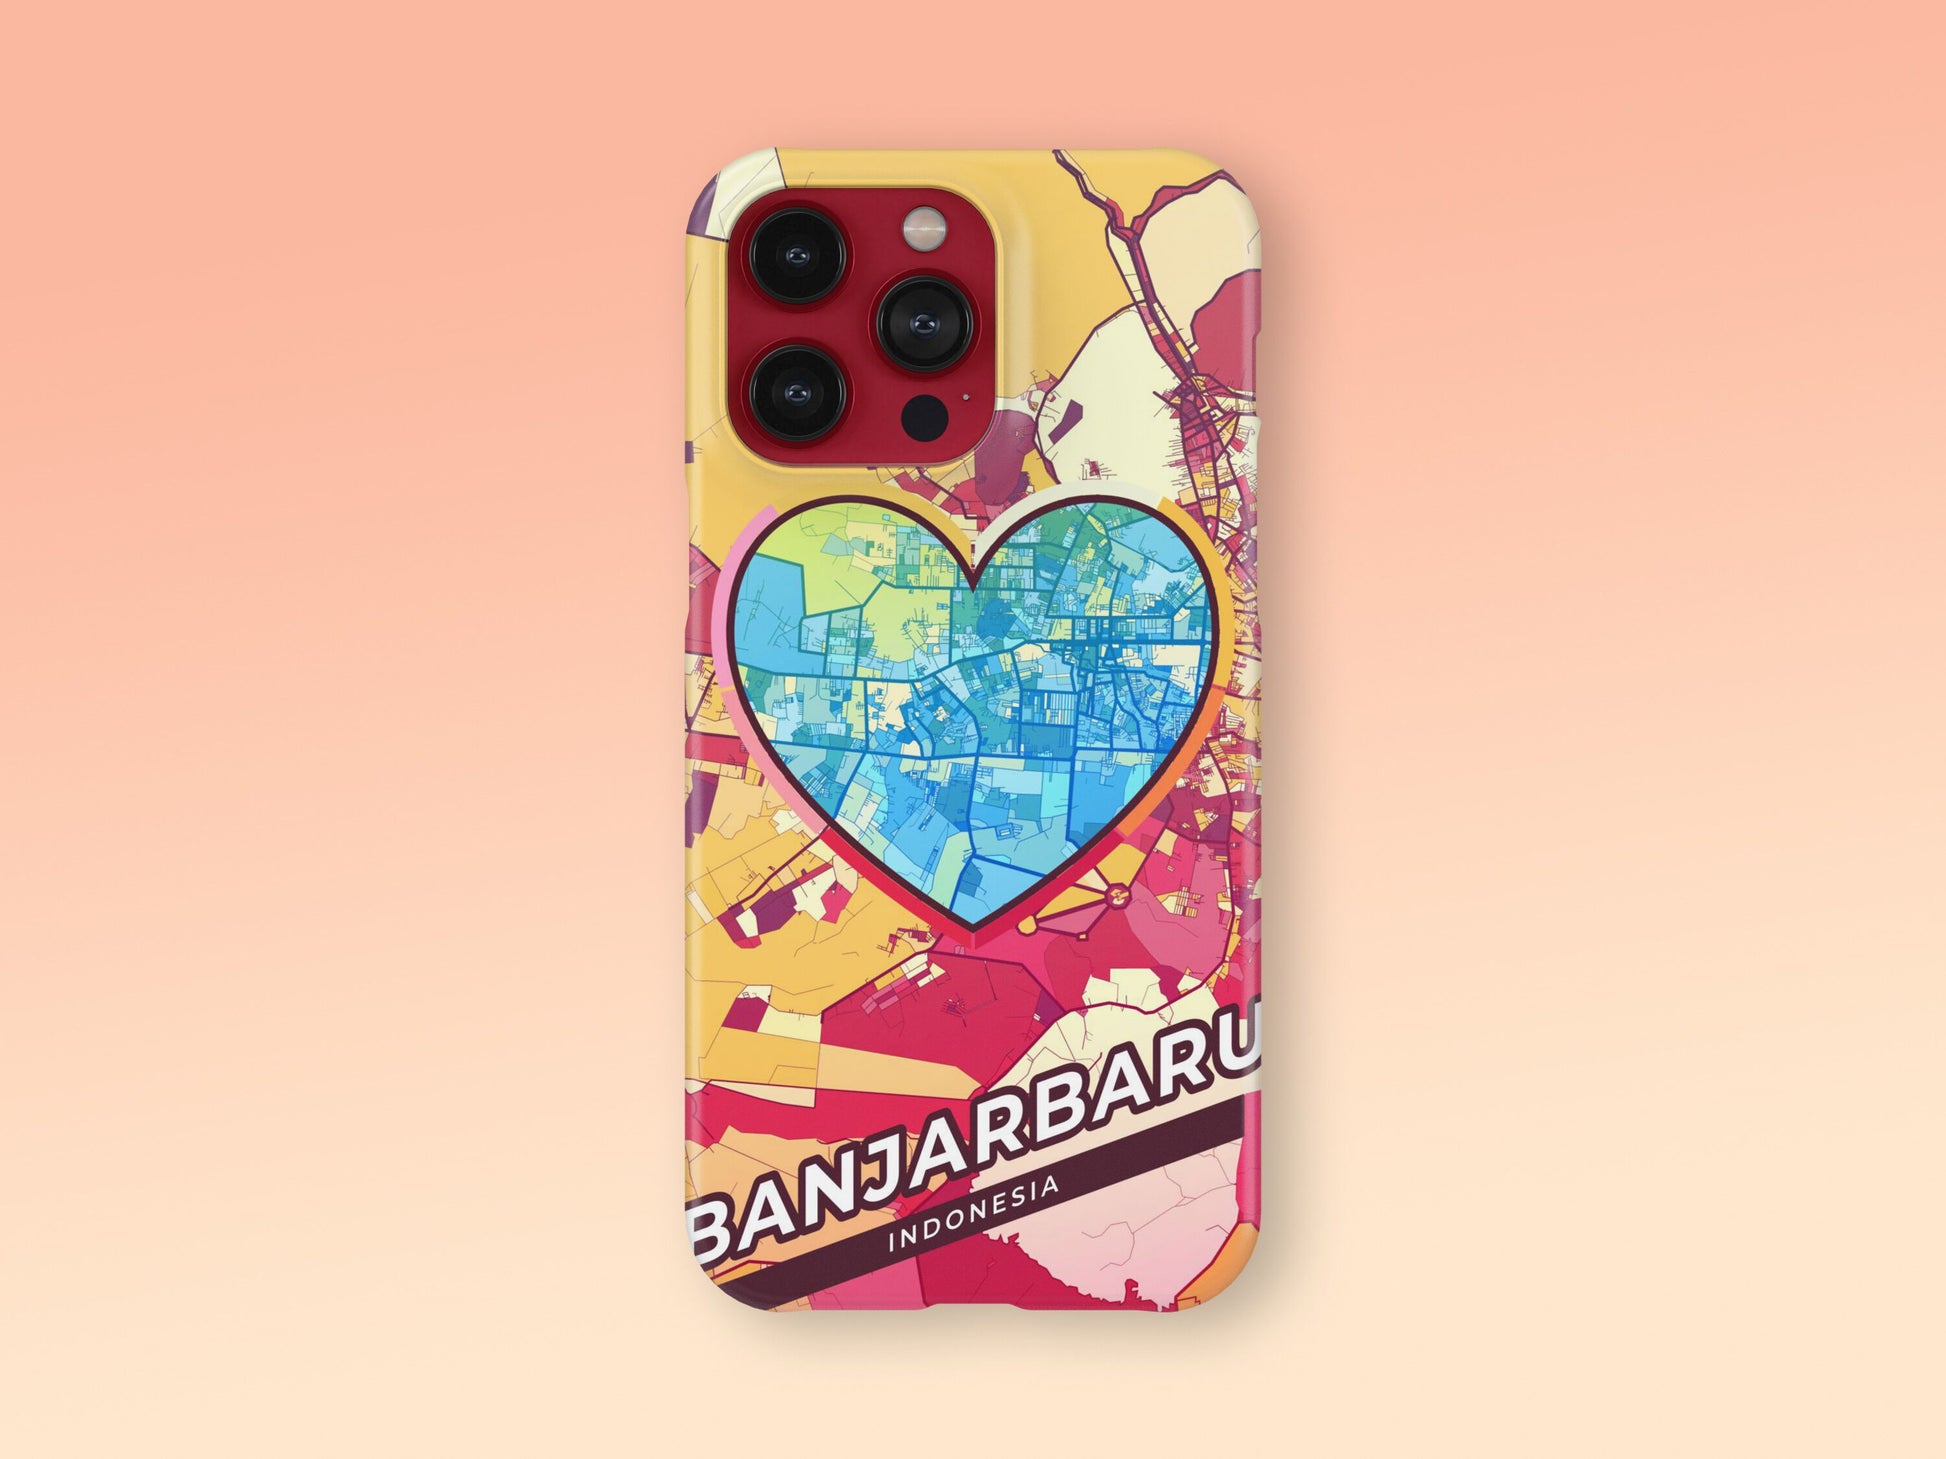 Banjarbaru Indonesia slim phone case with colorful icon. Birthday, wedding or housewarming gift. Couple match cases. 2